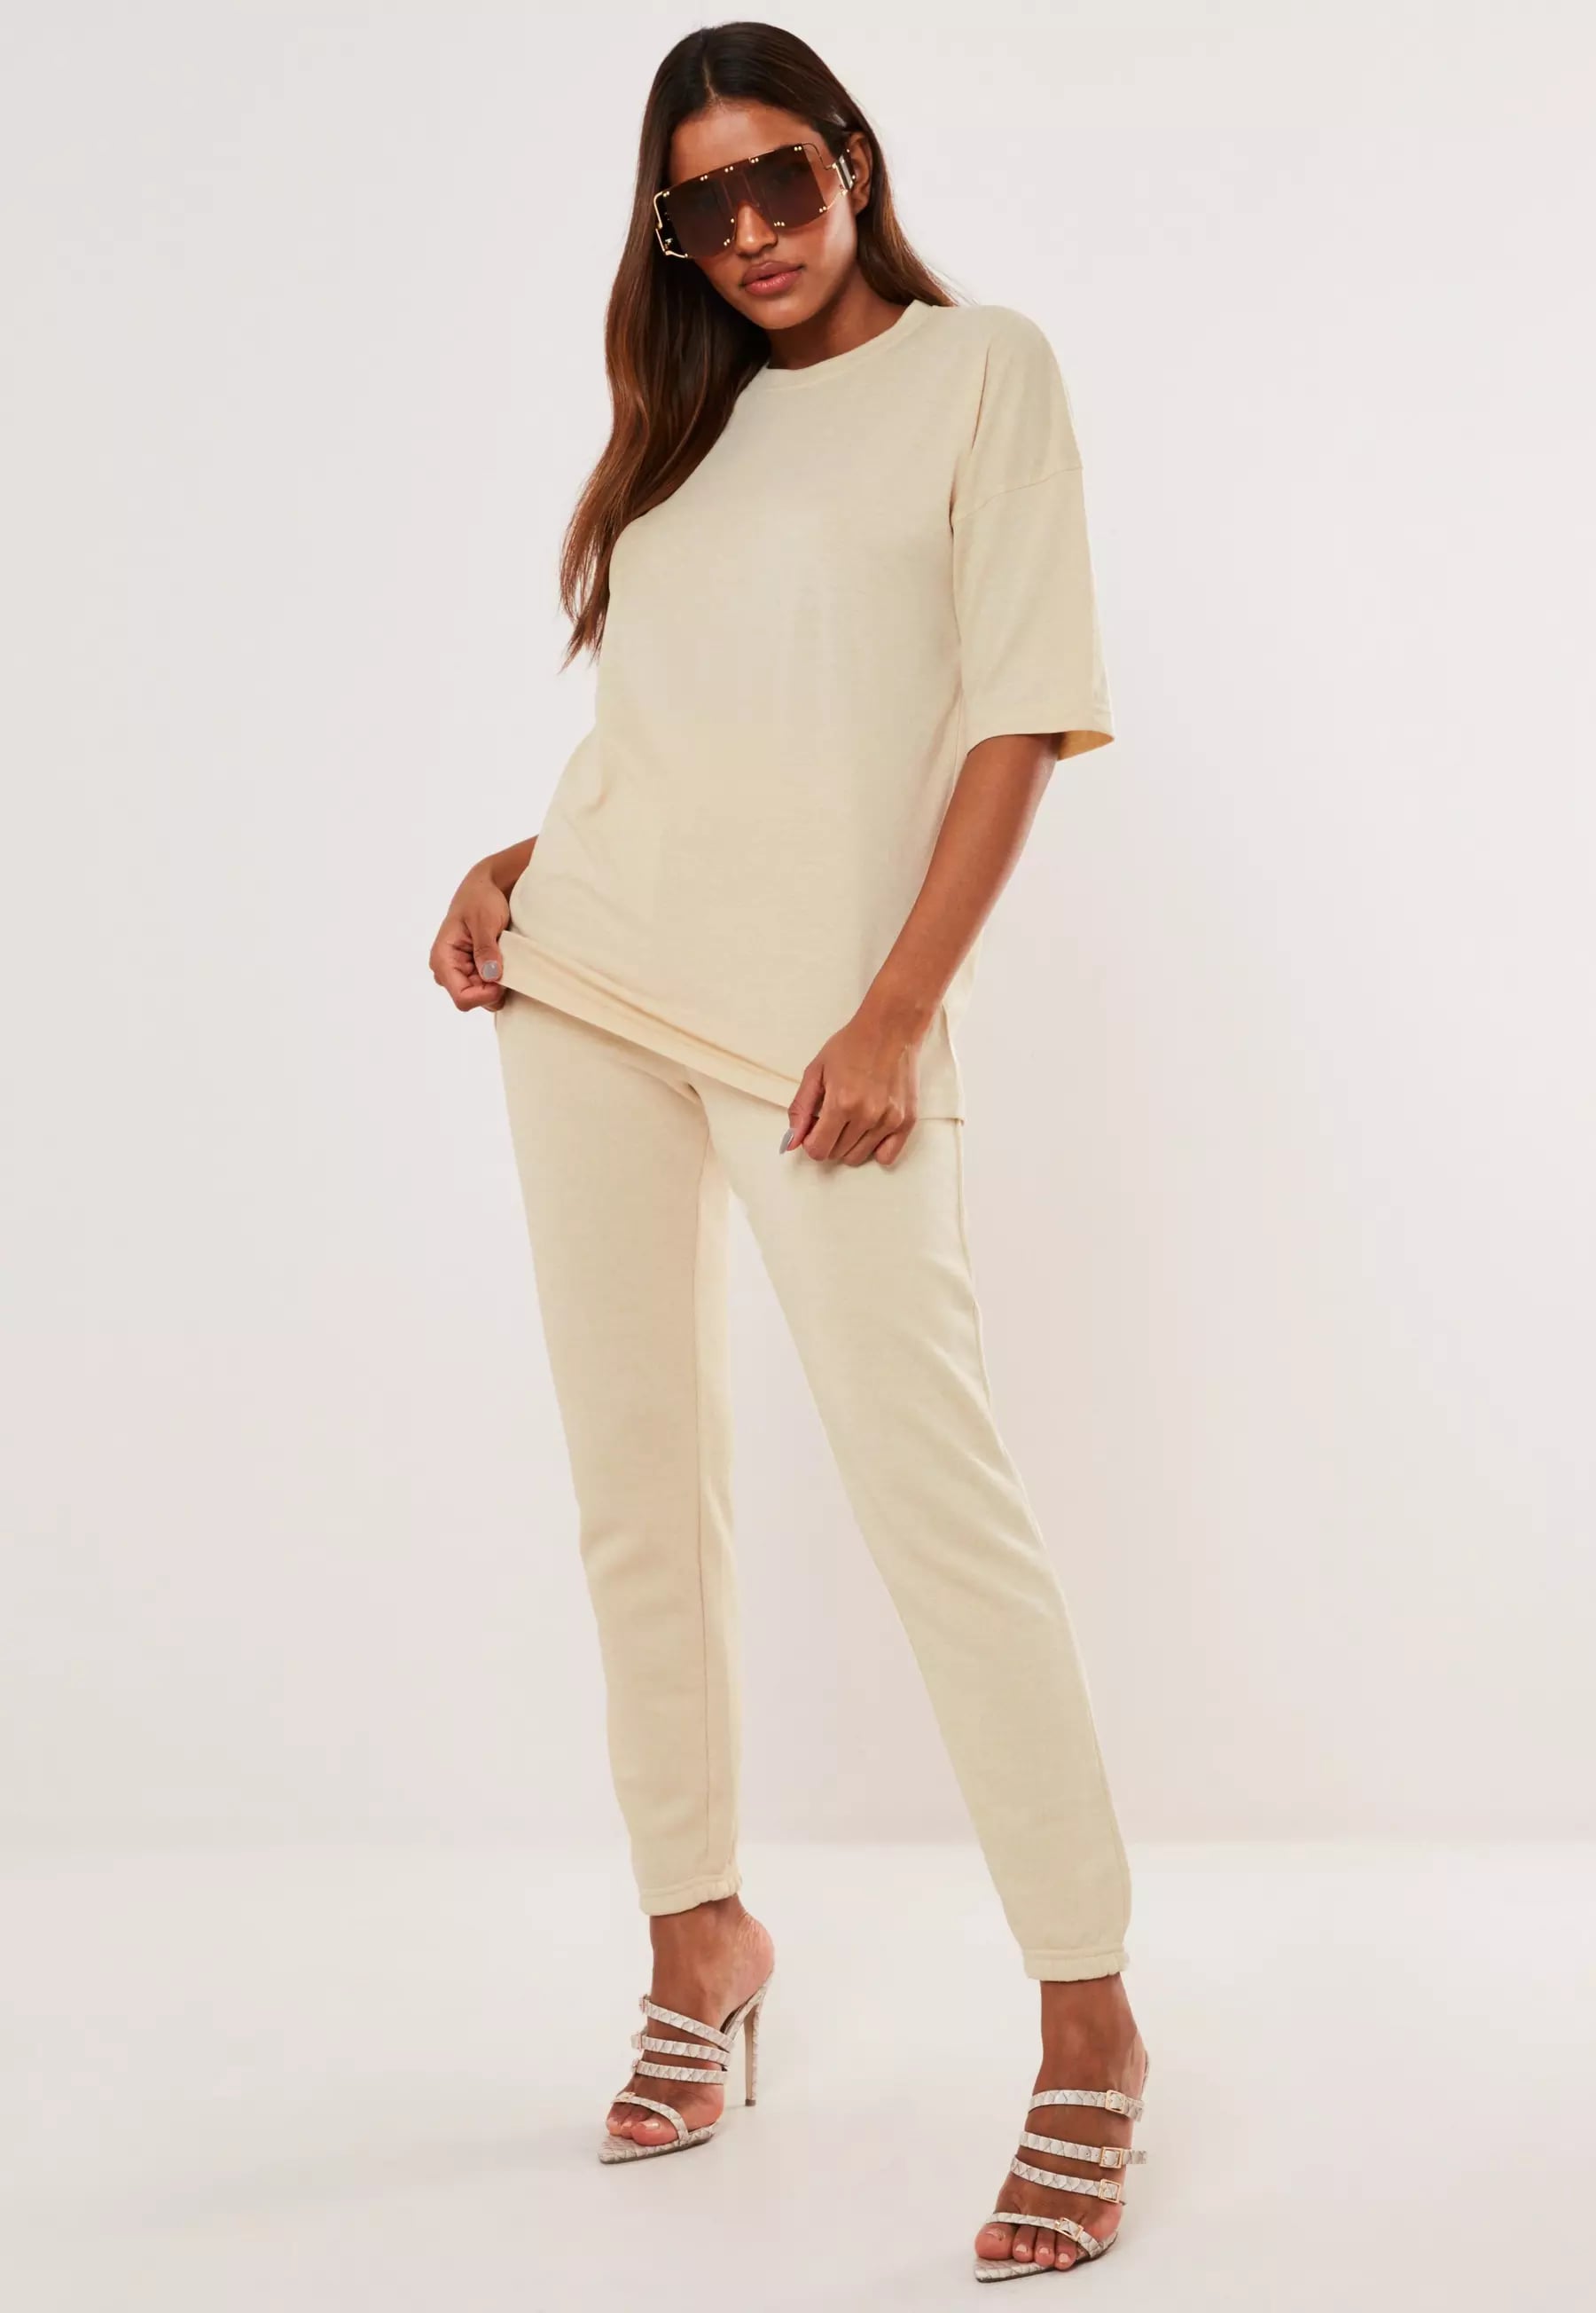 Missguided top and pants loungewear set in camel